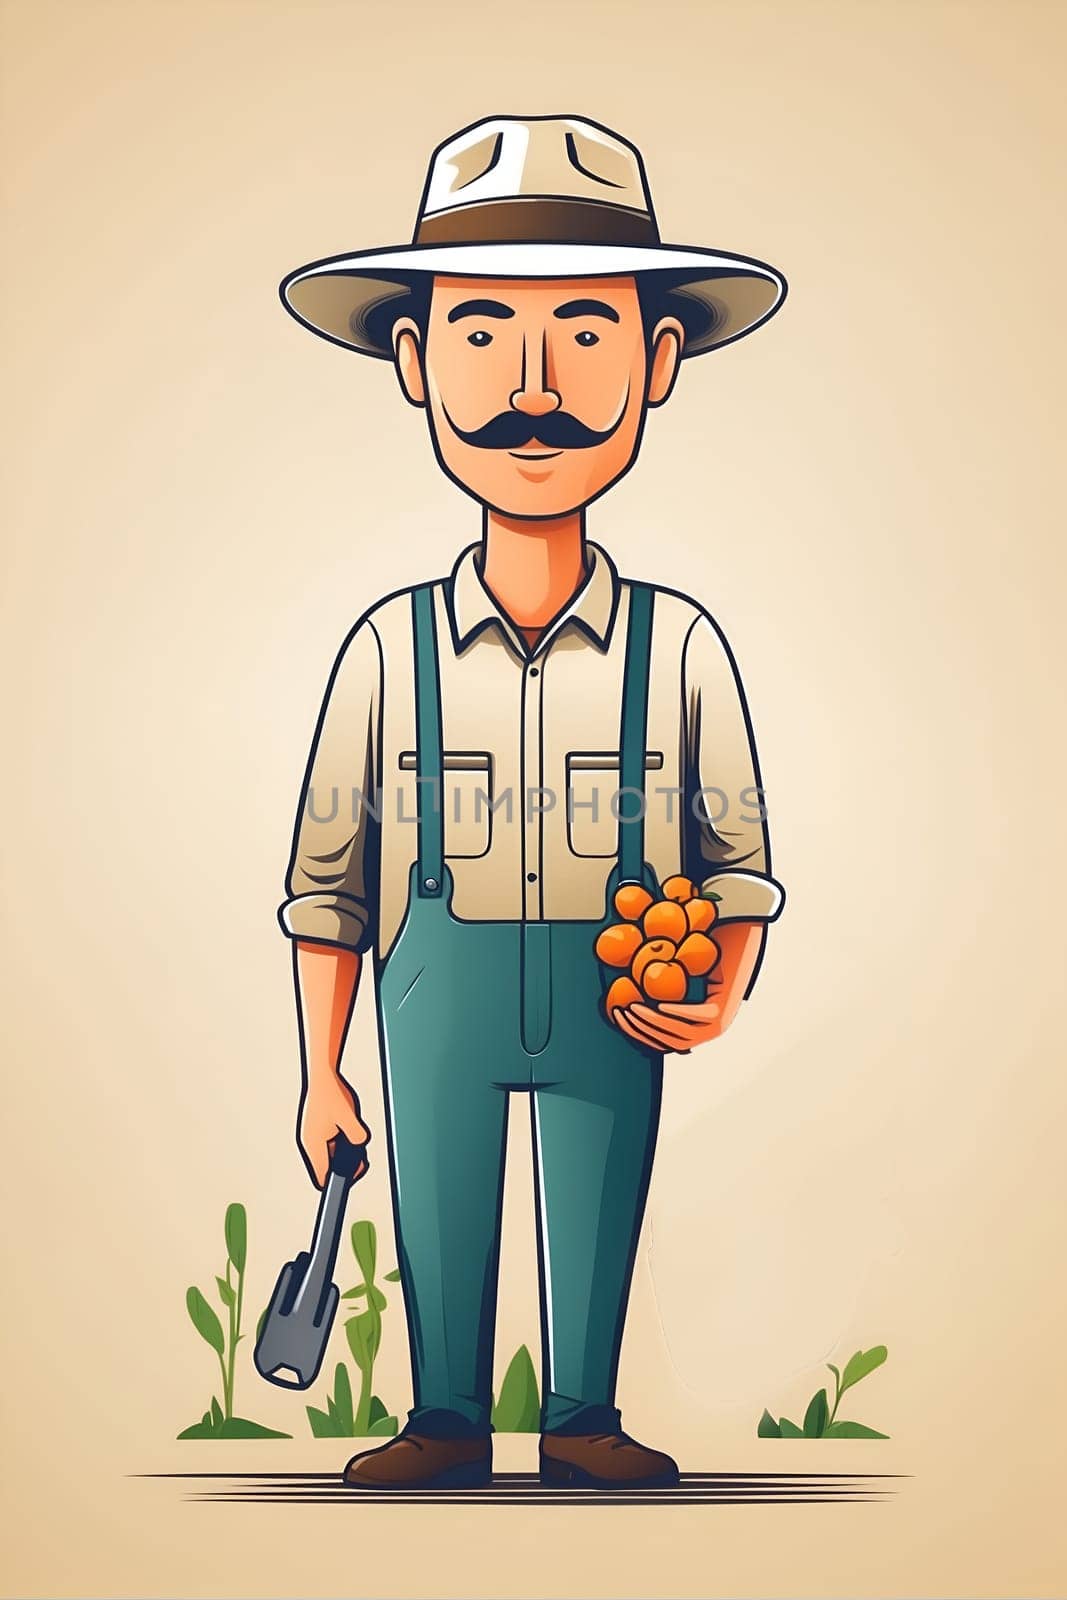 A man wearing overalls and a hat holds a bunch of oranges in his hands.